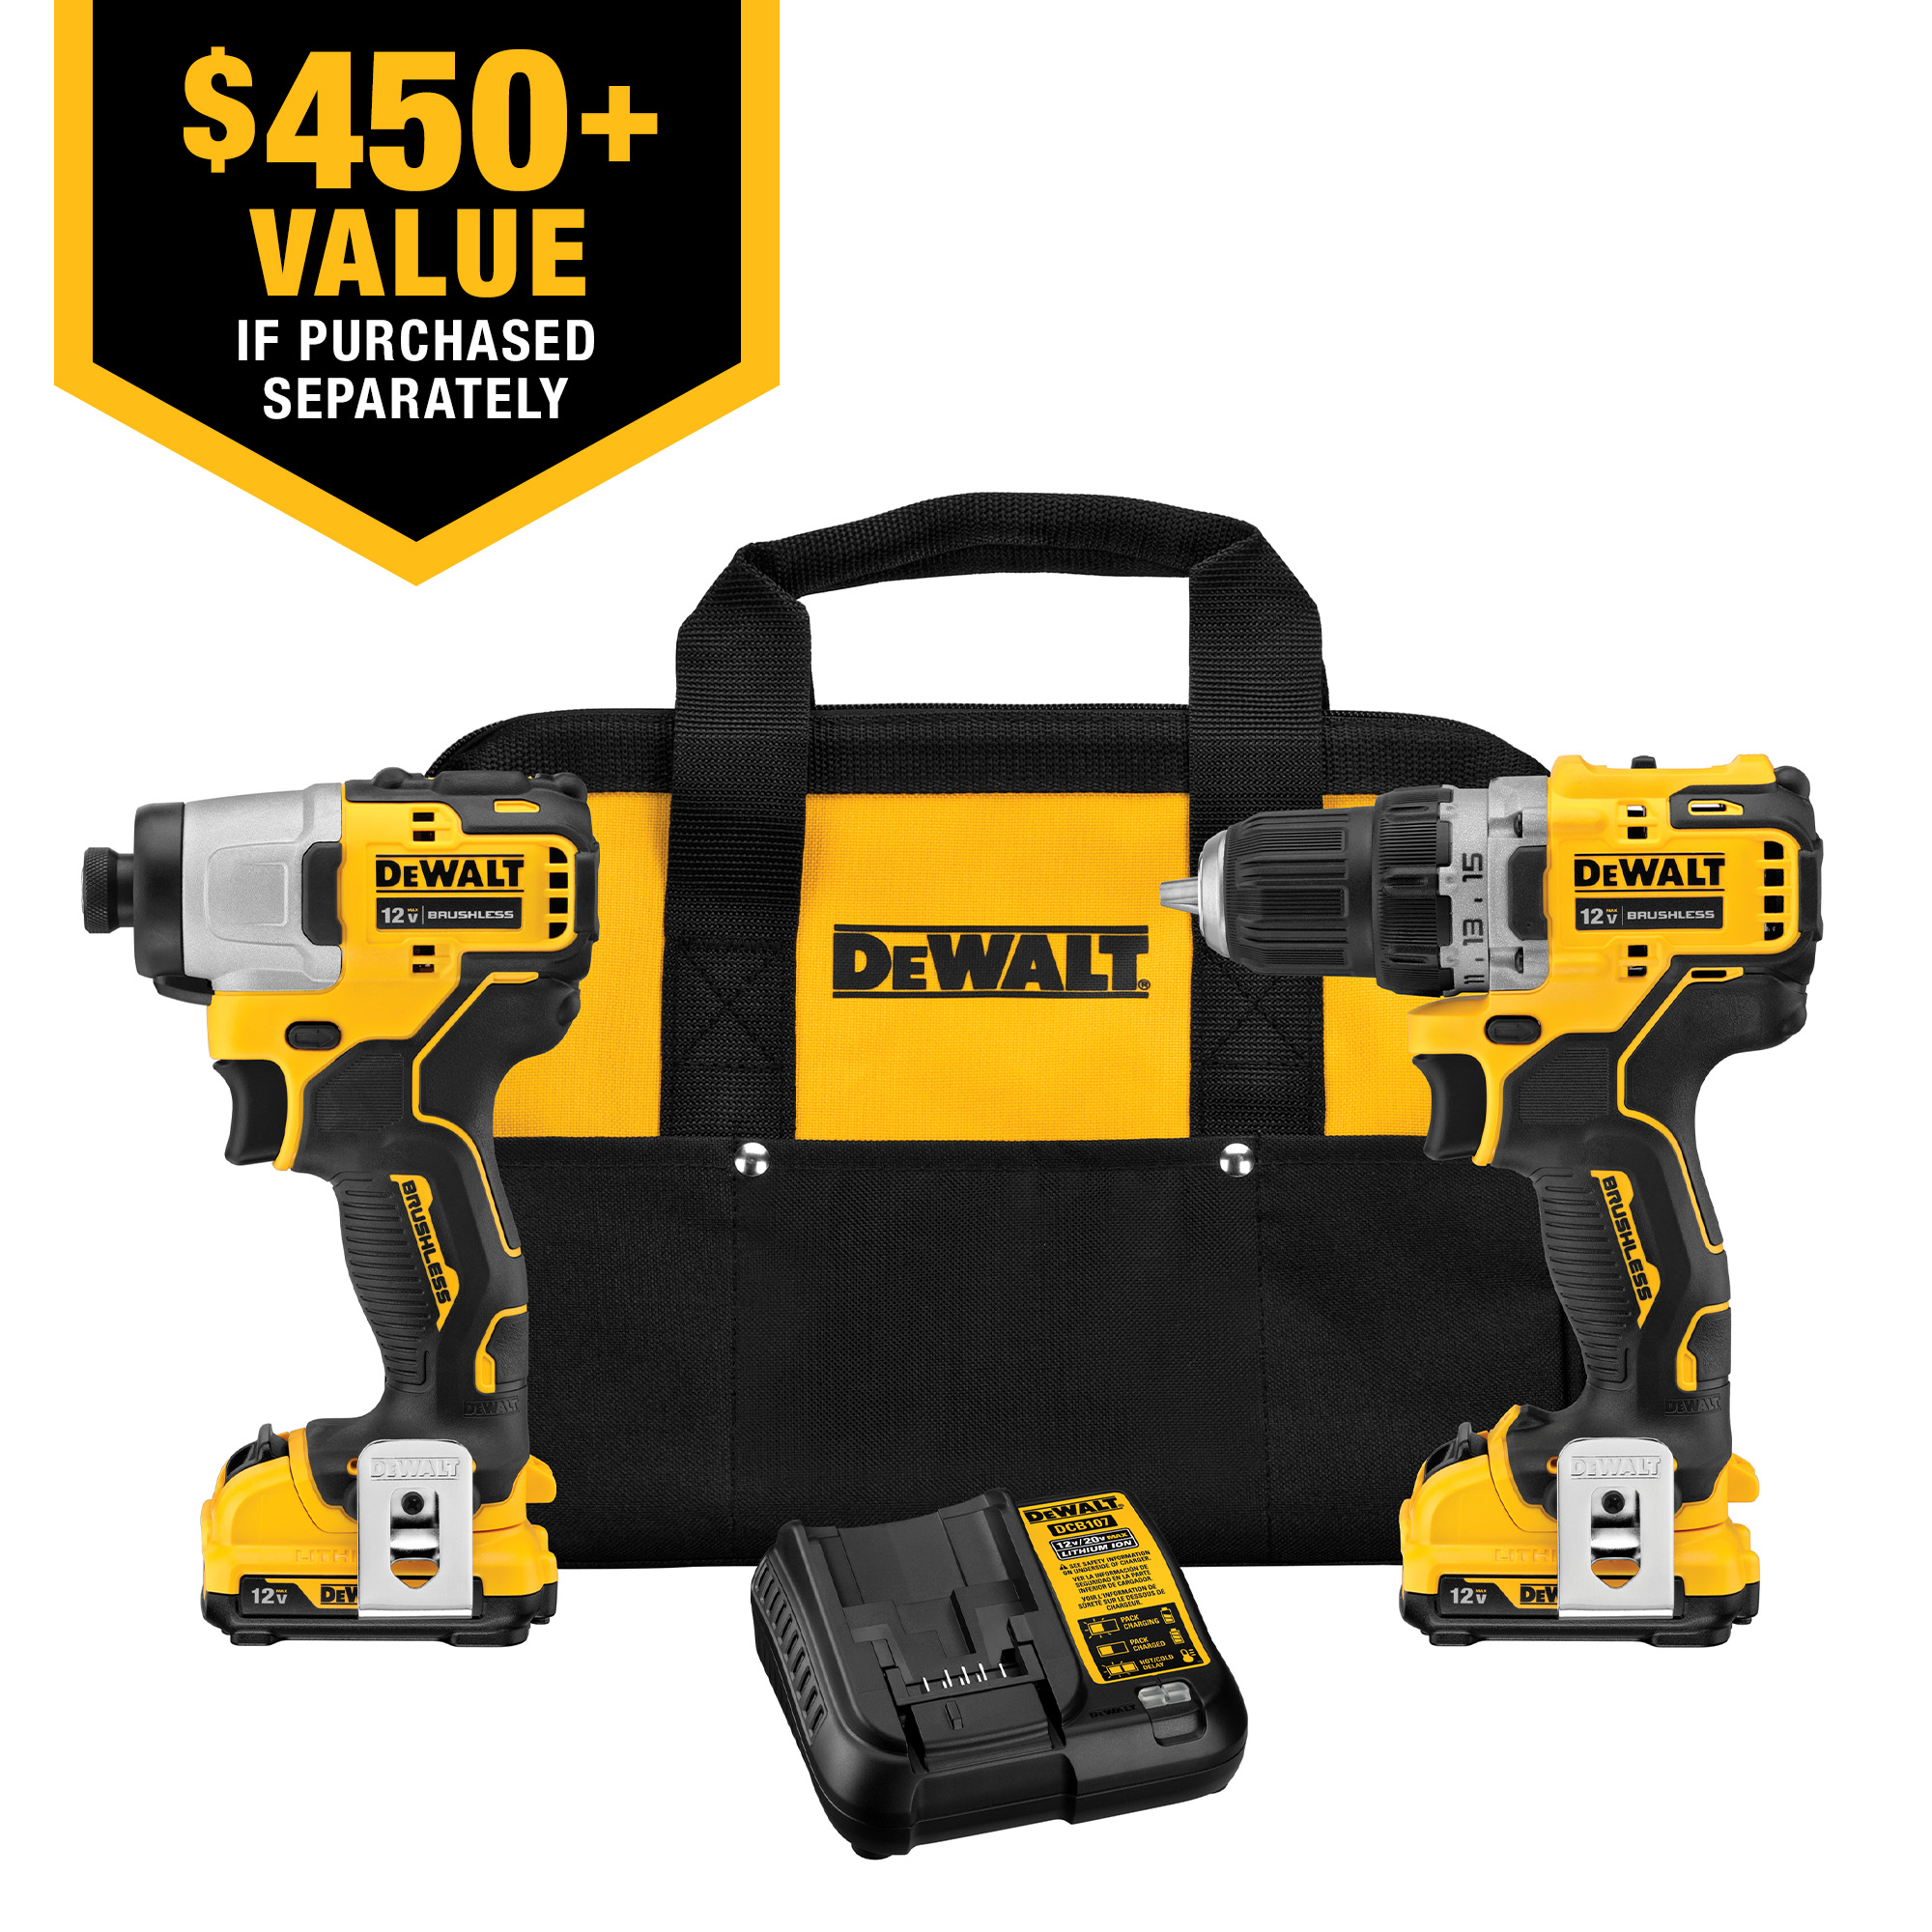 DEWALT XTREME 2-Tool 12V MAX XR Brushless DrilI/Impact Driver with Charger Included) in Power Tool Combo Kits department at Lowes.com